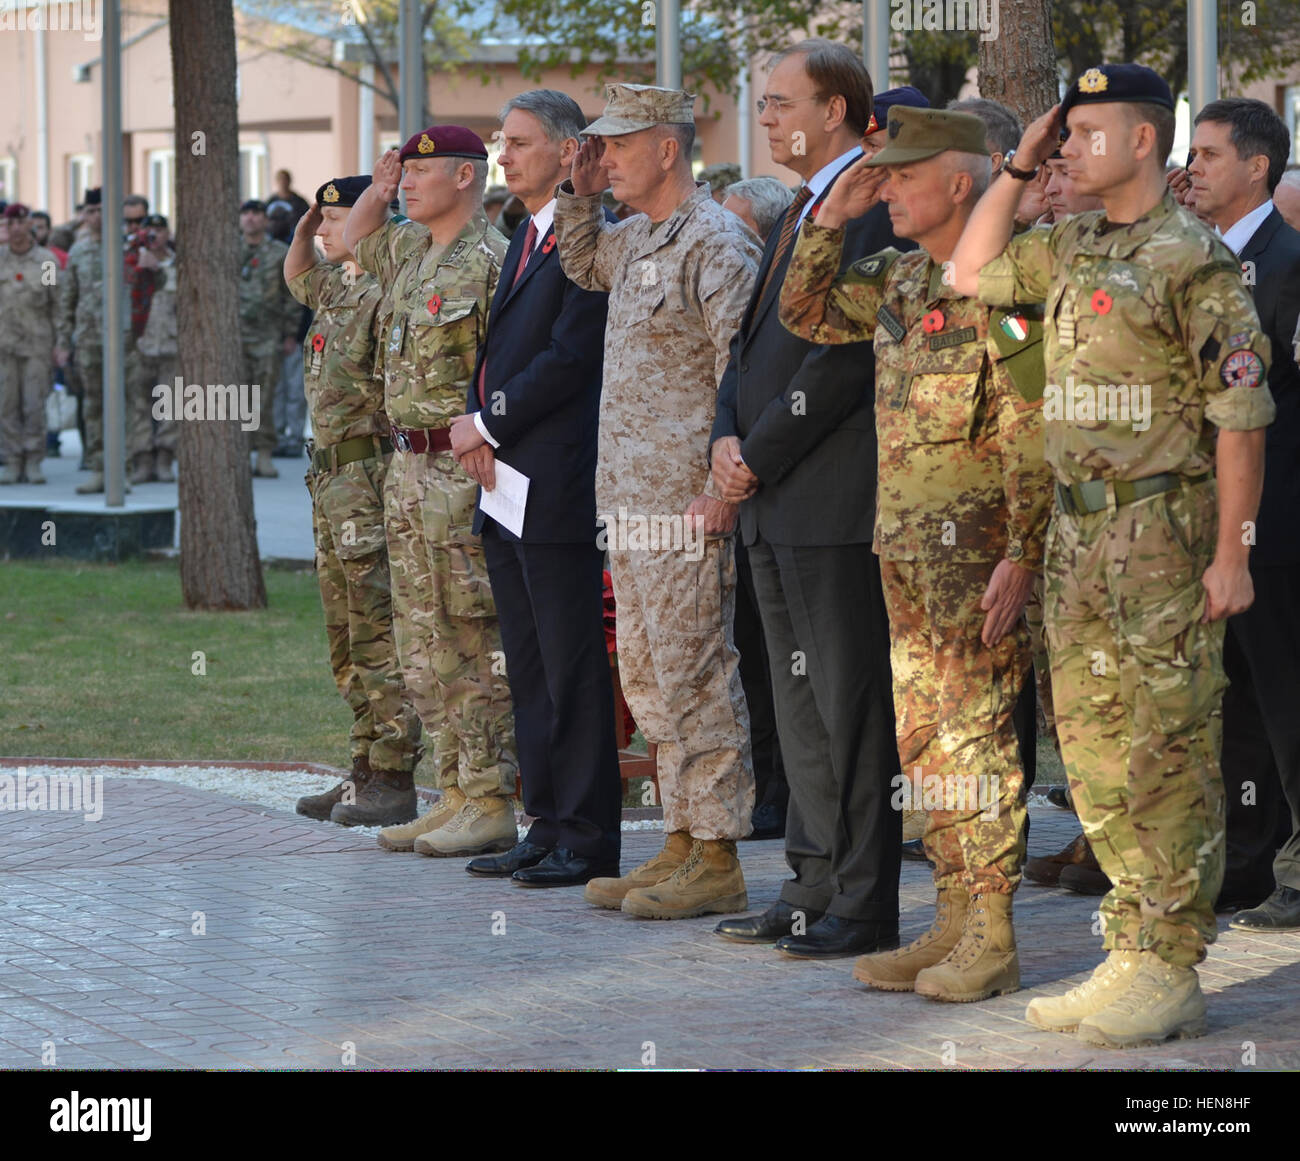 U.S. Marine Corps Gen. Joseph F. Dunford Jr., center, commander of International Security Assistance Force and U.S. Forces - Afghanistan, and several senior military and civilian officials render a salute during a Remembrance Day ceremony held at ISAF Headquarters in Kabul, Afghanistan, Nov. 11, 2013. The outdoor ceremony consisted of a few readings from the chaplain, a lying of wreaths on the ISAF-Afghan National Security Force monument, and two minutes of silence. Remembrance Day is a memorial day observed in many countries since the end of World War I to remember the service members who hav Stock Photo